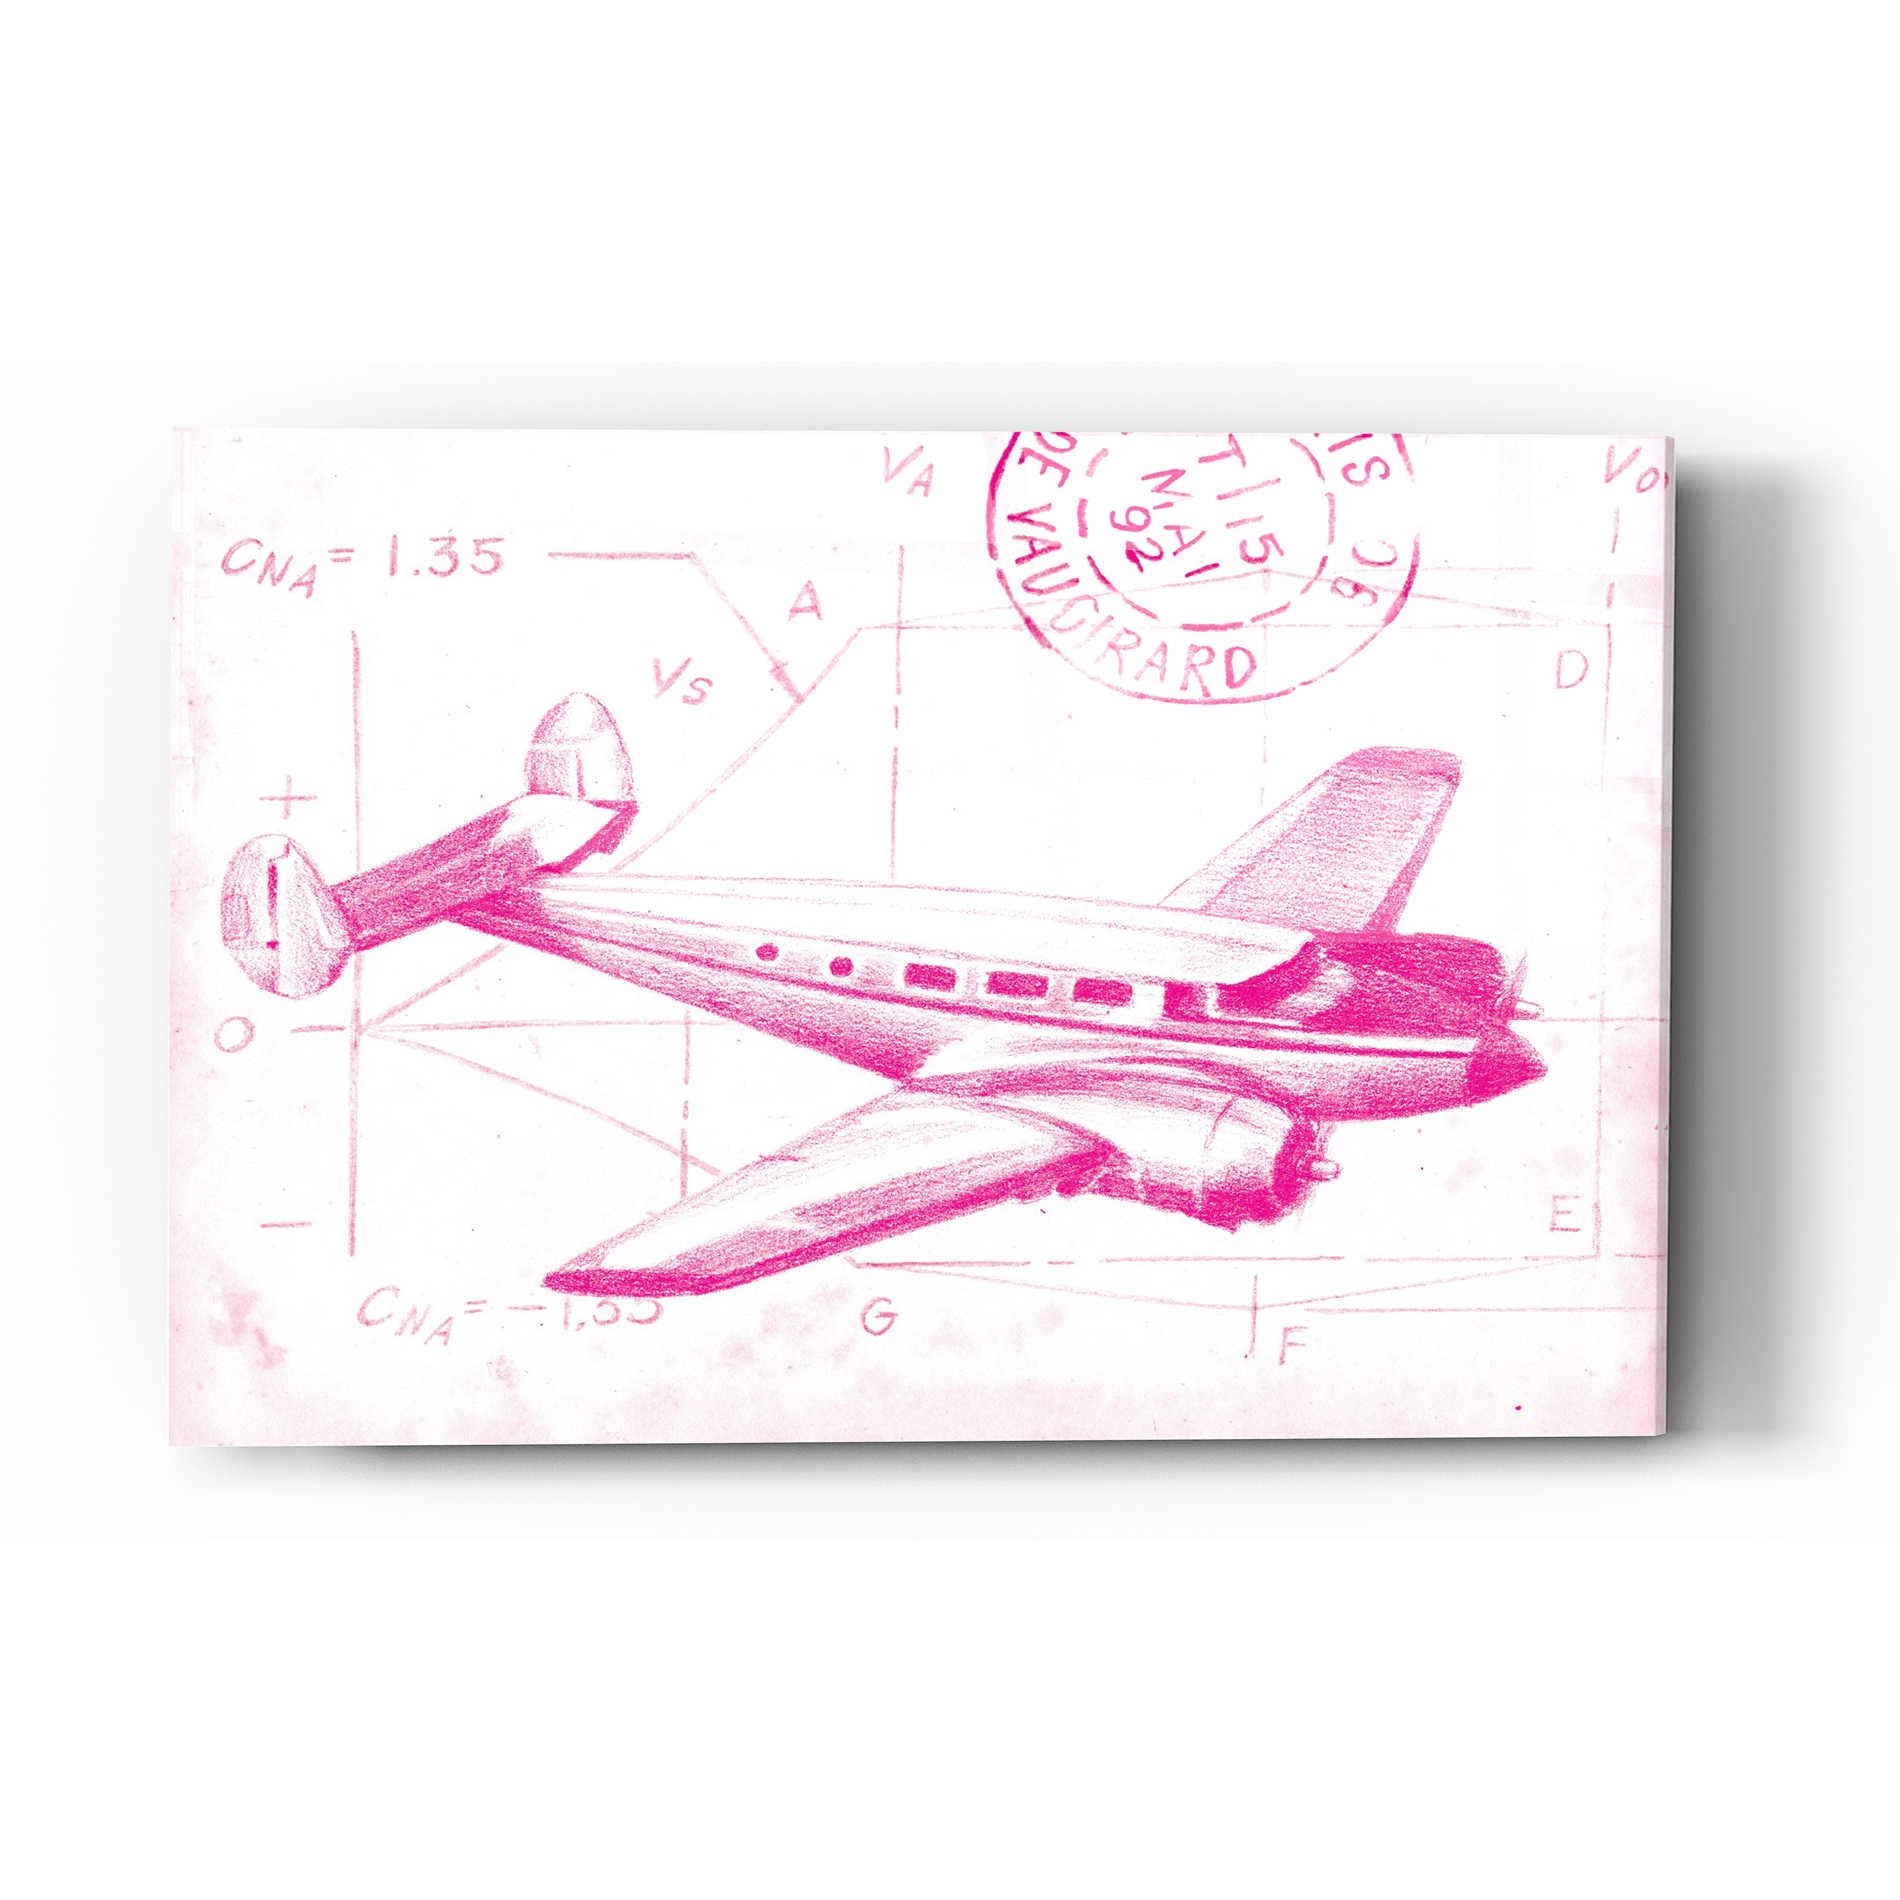 Epic Art 'Flight Schematic IV in Pink' by Ethan Harper Acrylic Glass Wall Art,12x16